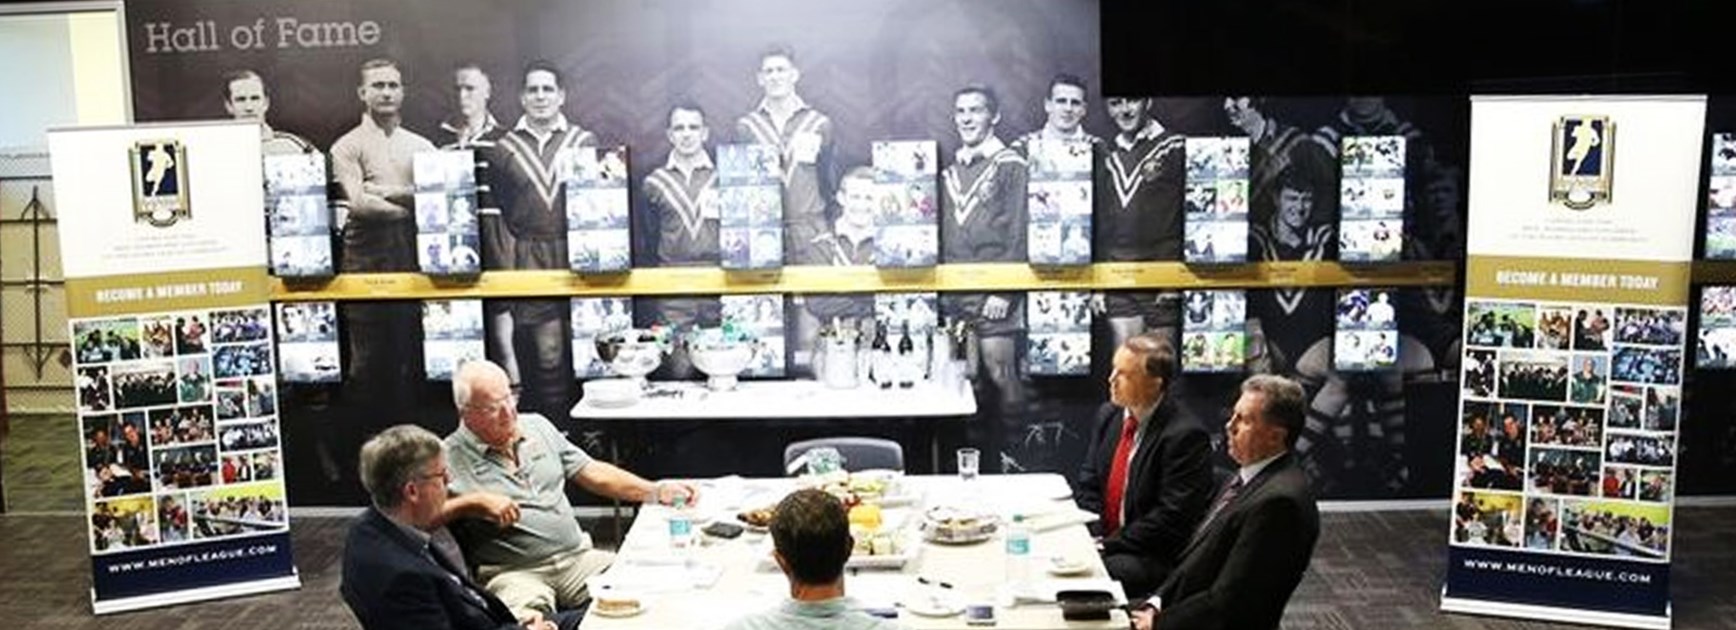 The panel deliberating on the selection of the Kangaroos' greatest captain.